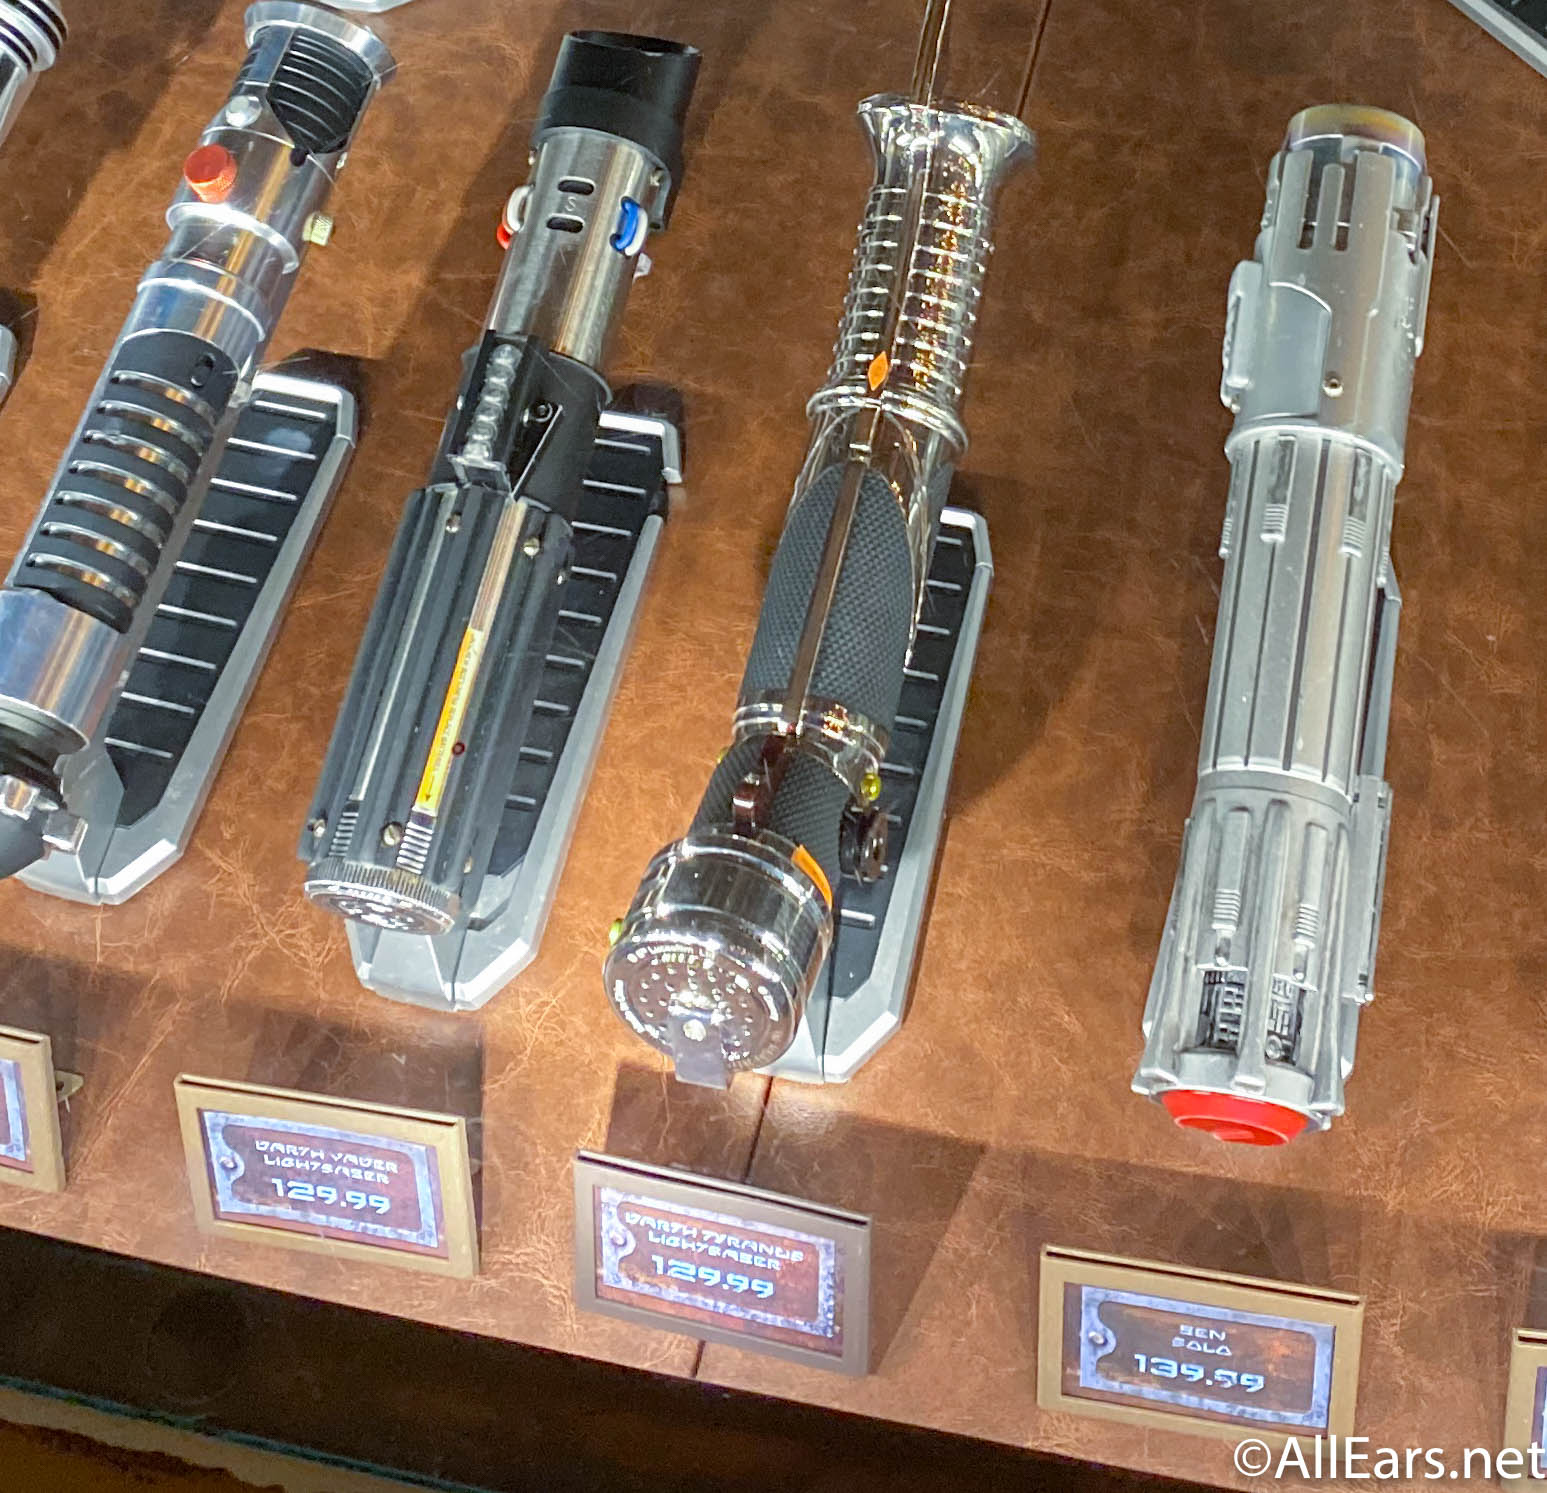 PHOTOS: Join the Dark Side With Count Dooku's Lightsaber Now Available in  Disney World! - AllEars.Net